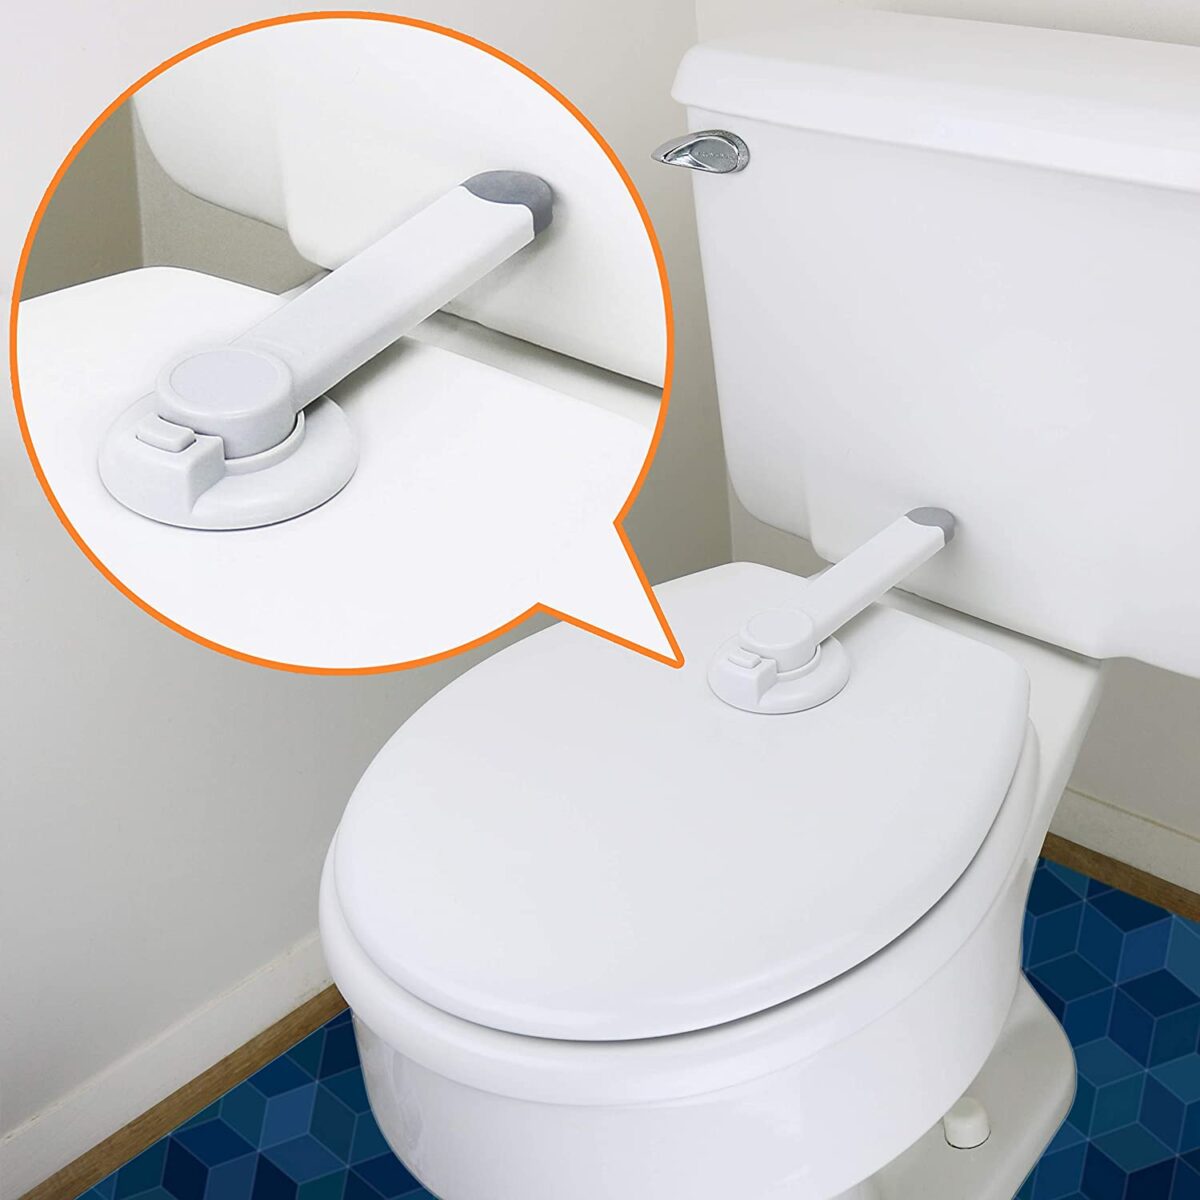 Baby Toilet Lock (2 Pack) Ideal Baby Proof Toilet Lid Lock with Arm